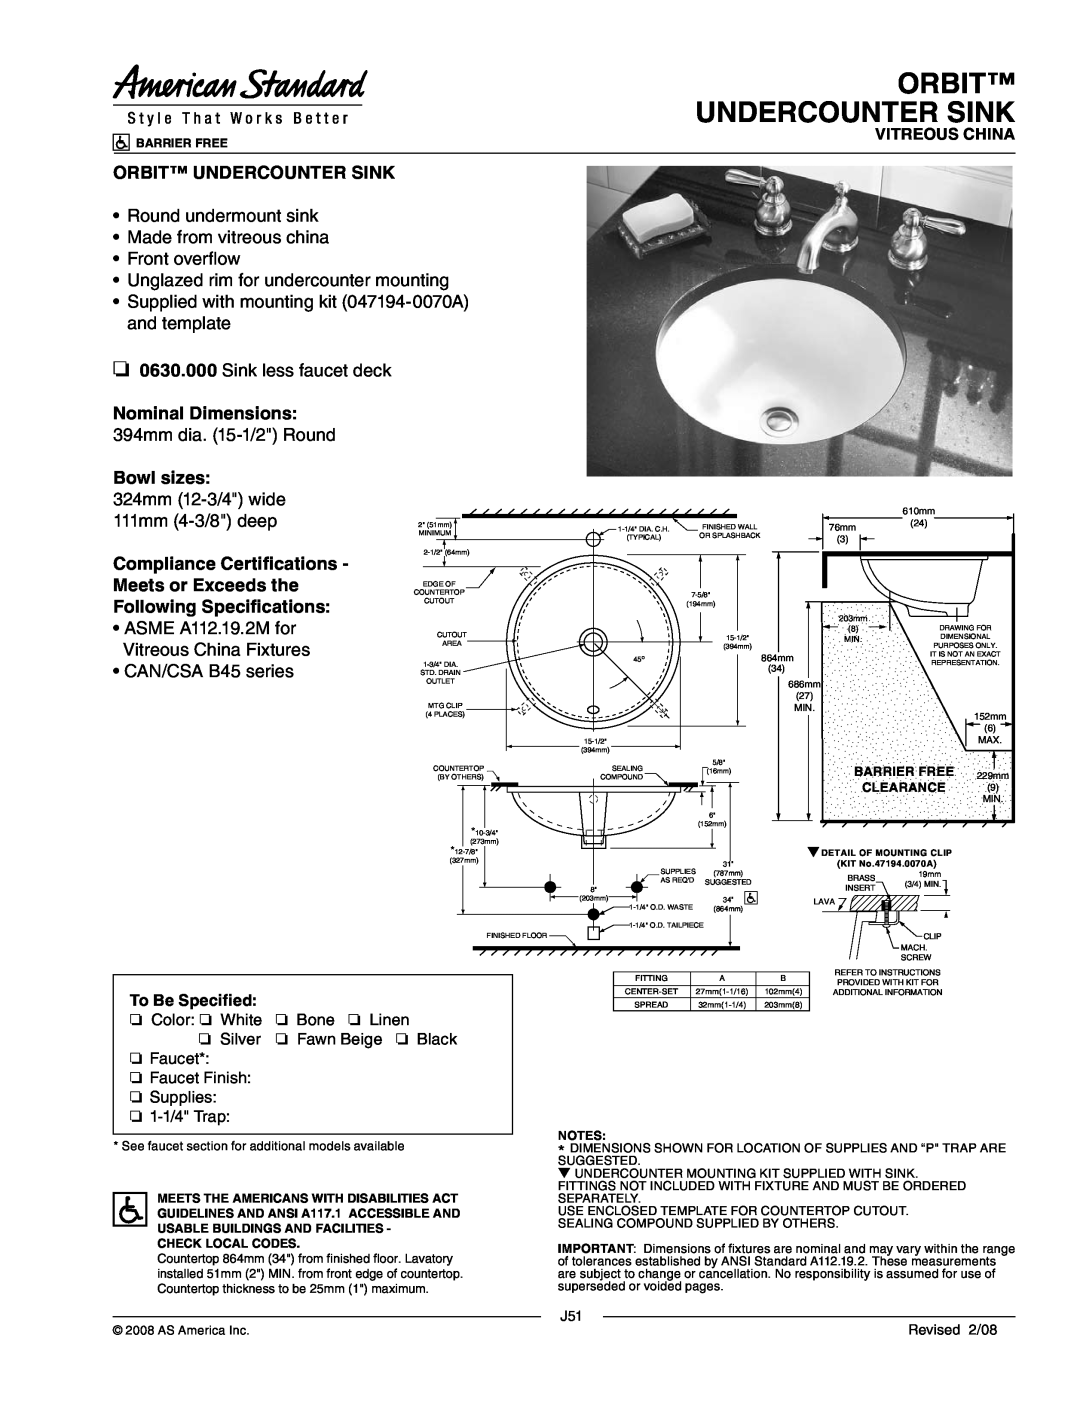 American Standard 0630.000 dimensions Orbit Undercounter Sink, Nominal Dimensions 394mm dia. 15-1/2Round, Bowl sizes 